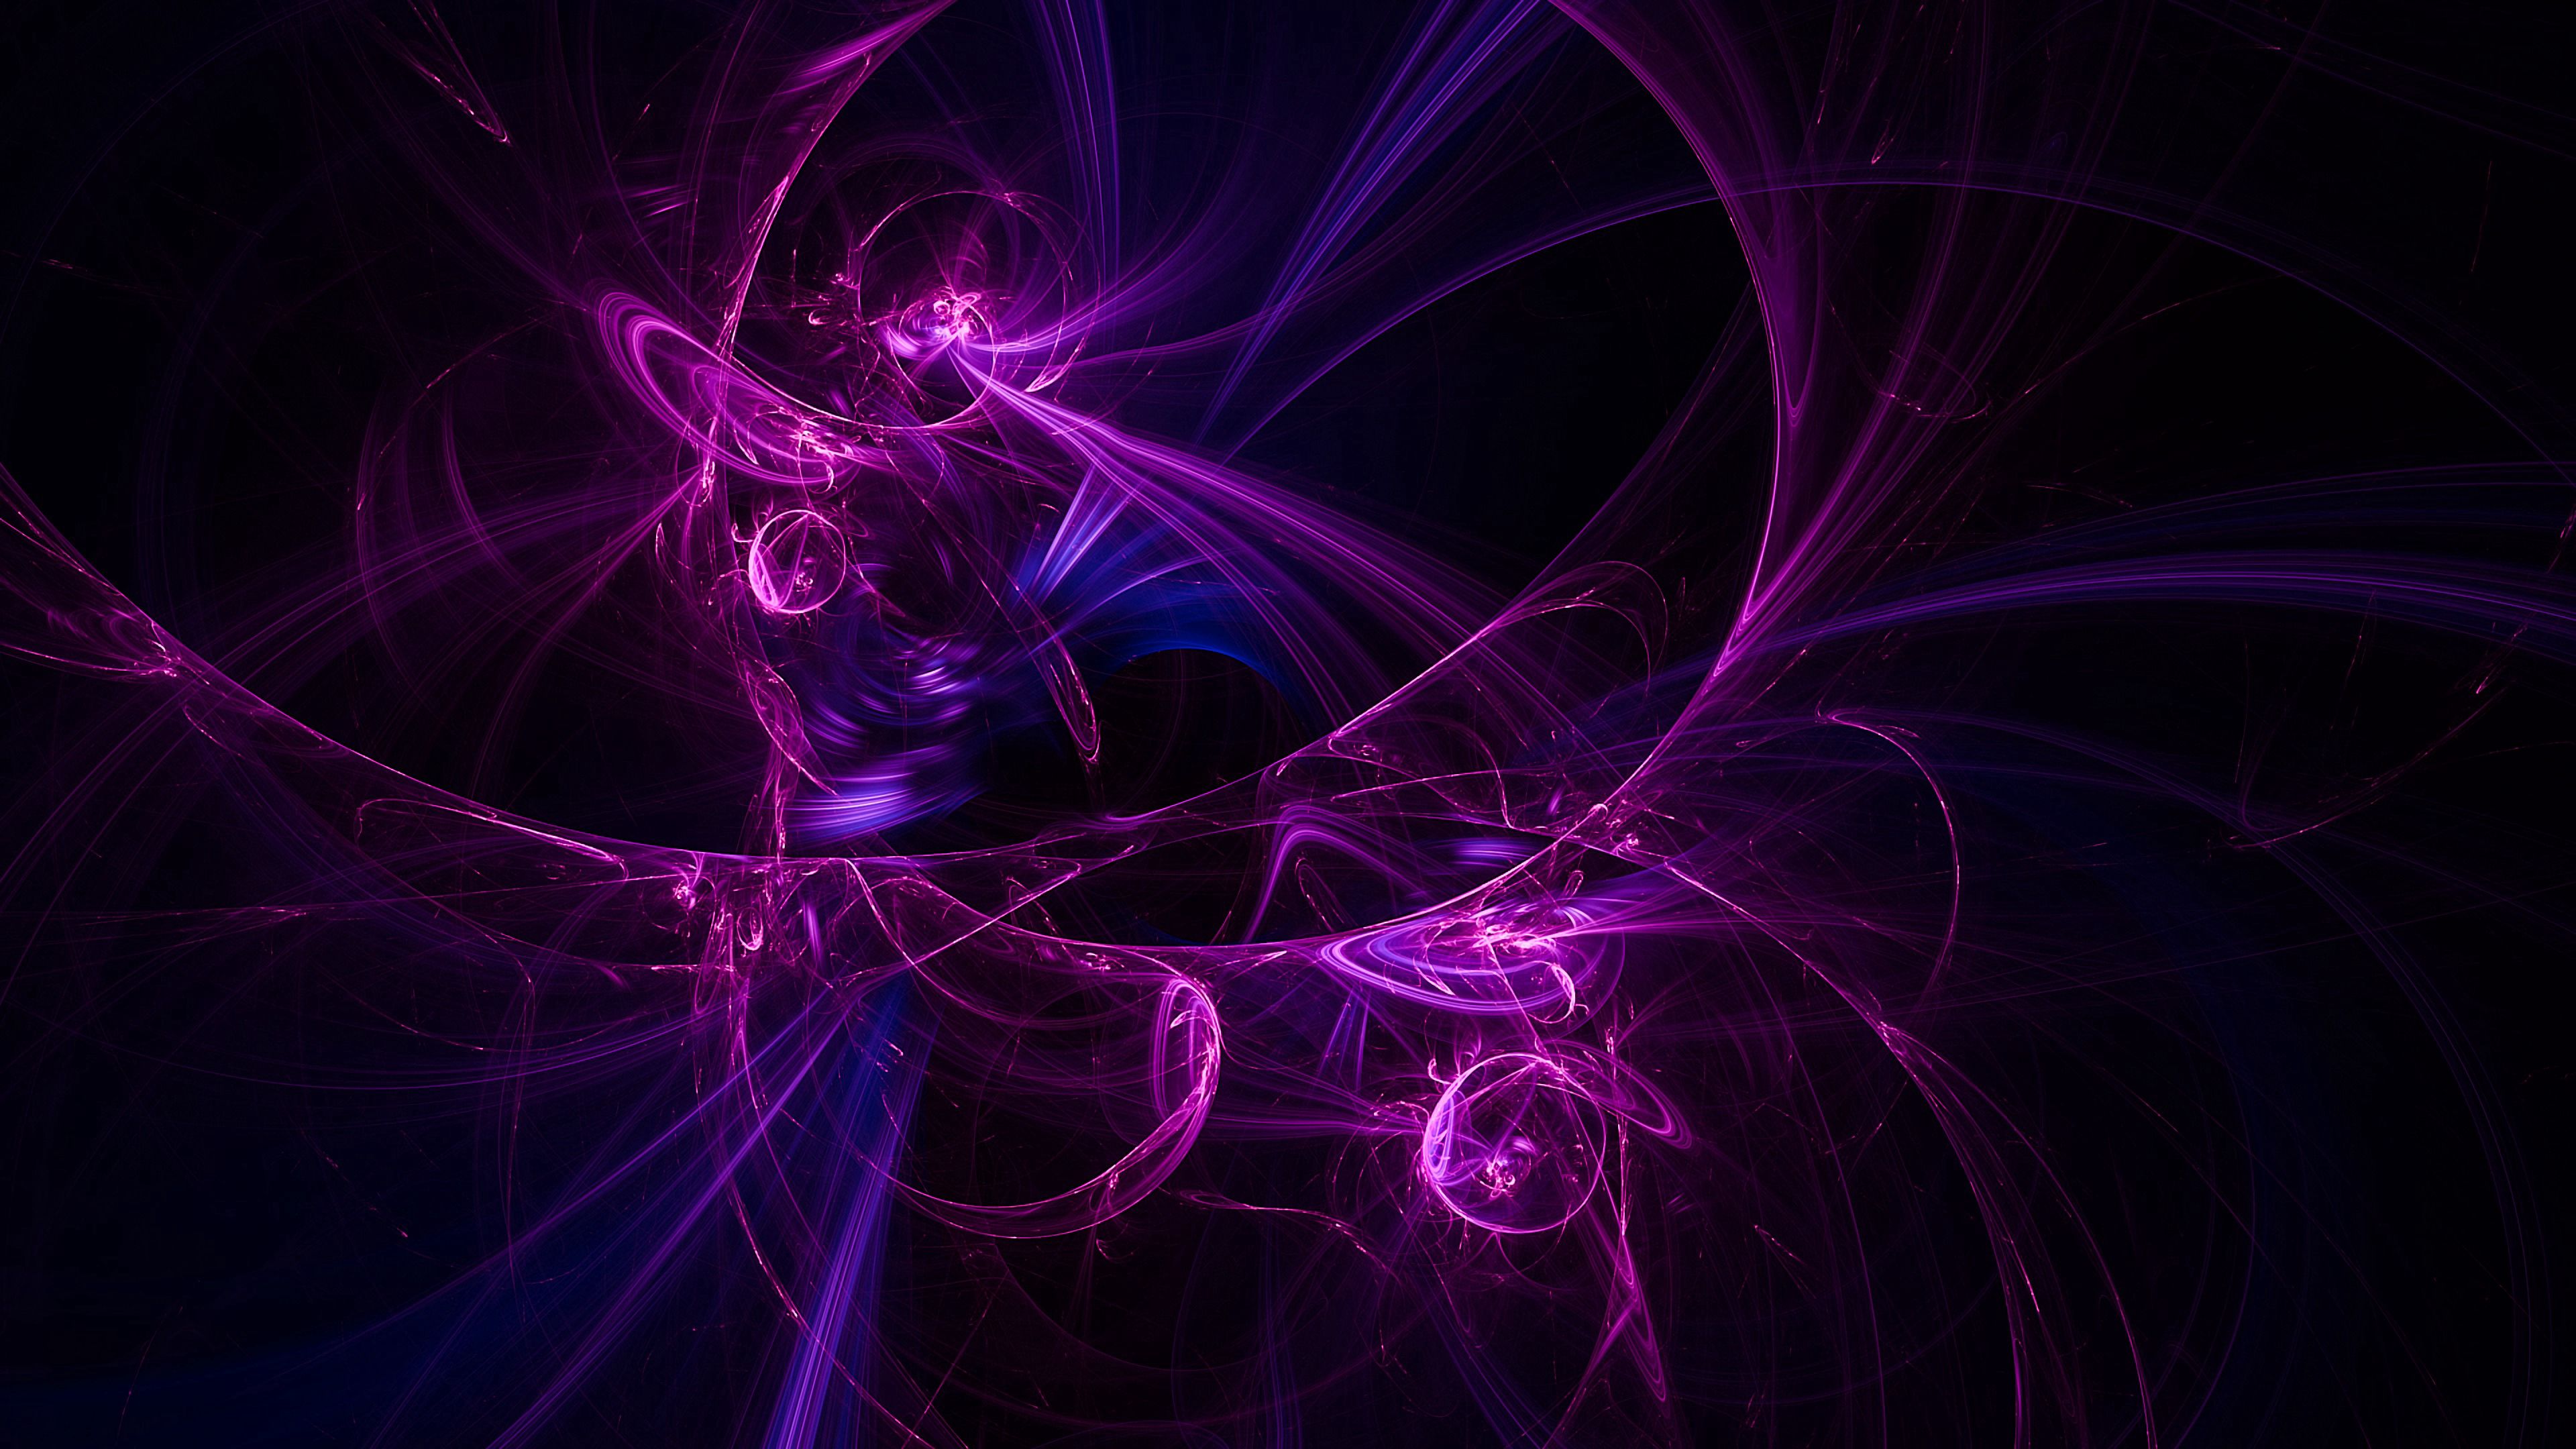 purple, beams, abstract, violet, rays, fractal, radiation 2160p